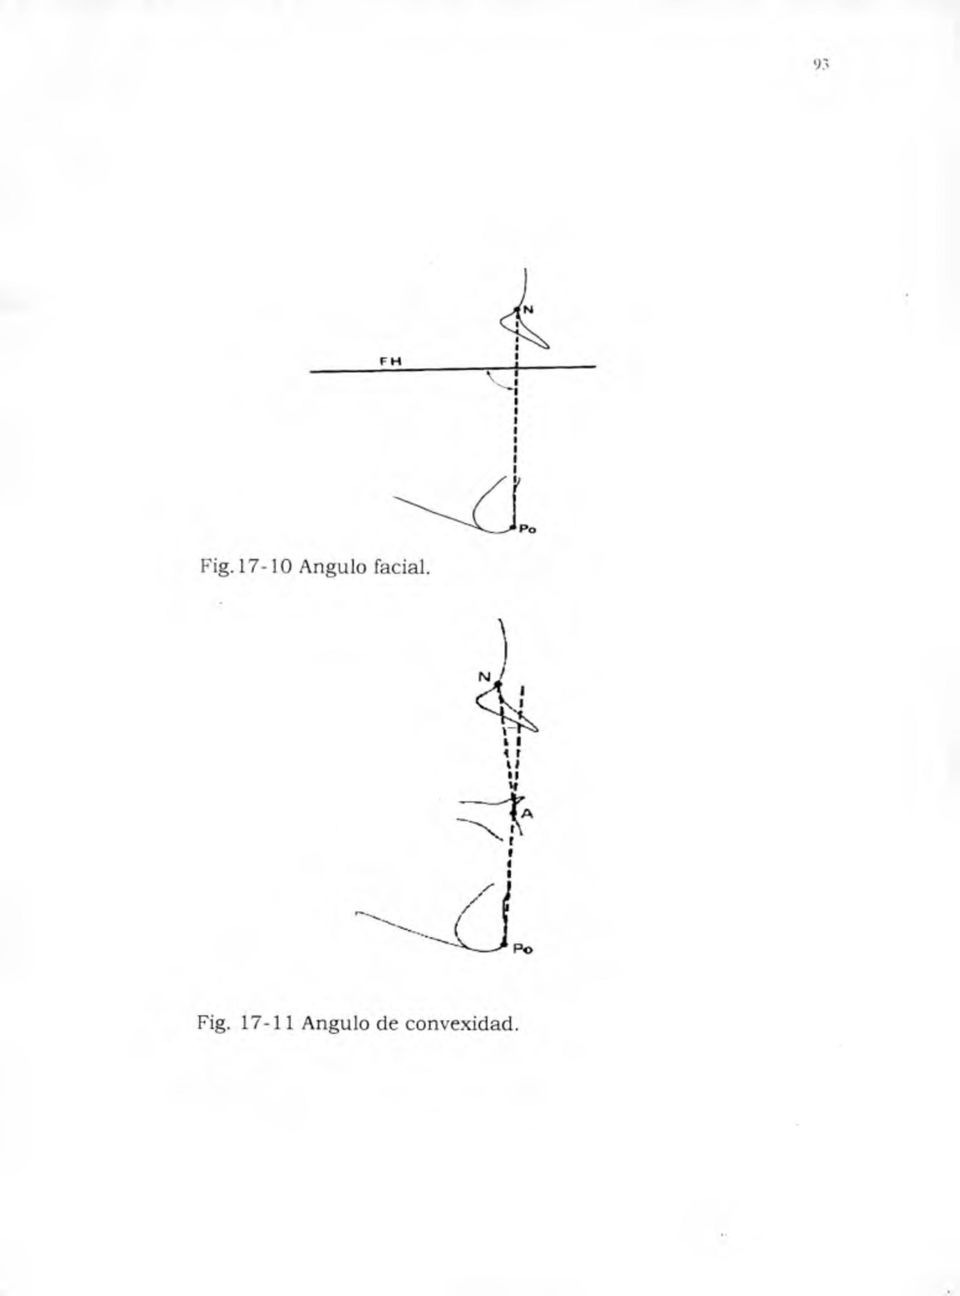 Fig. 17-11